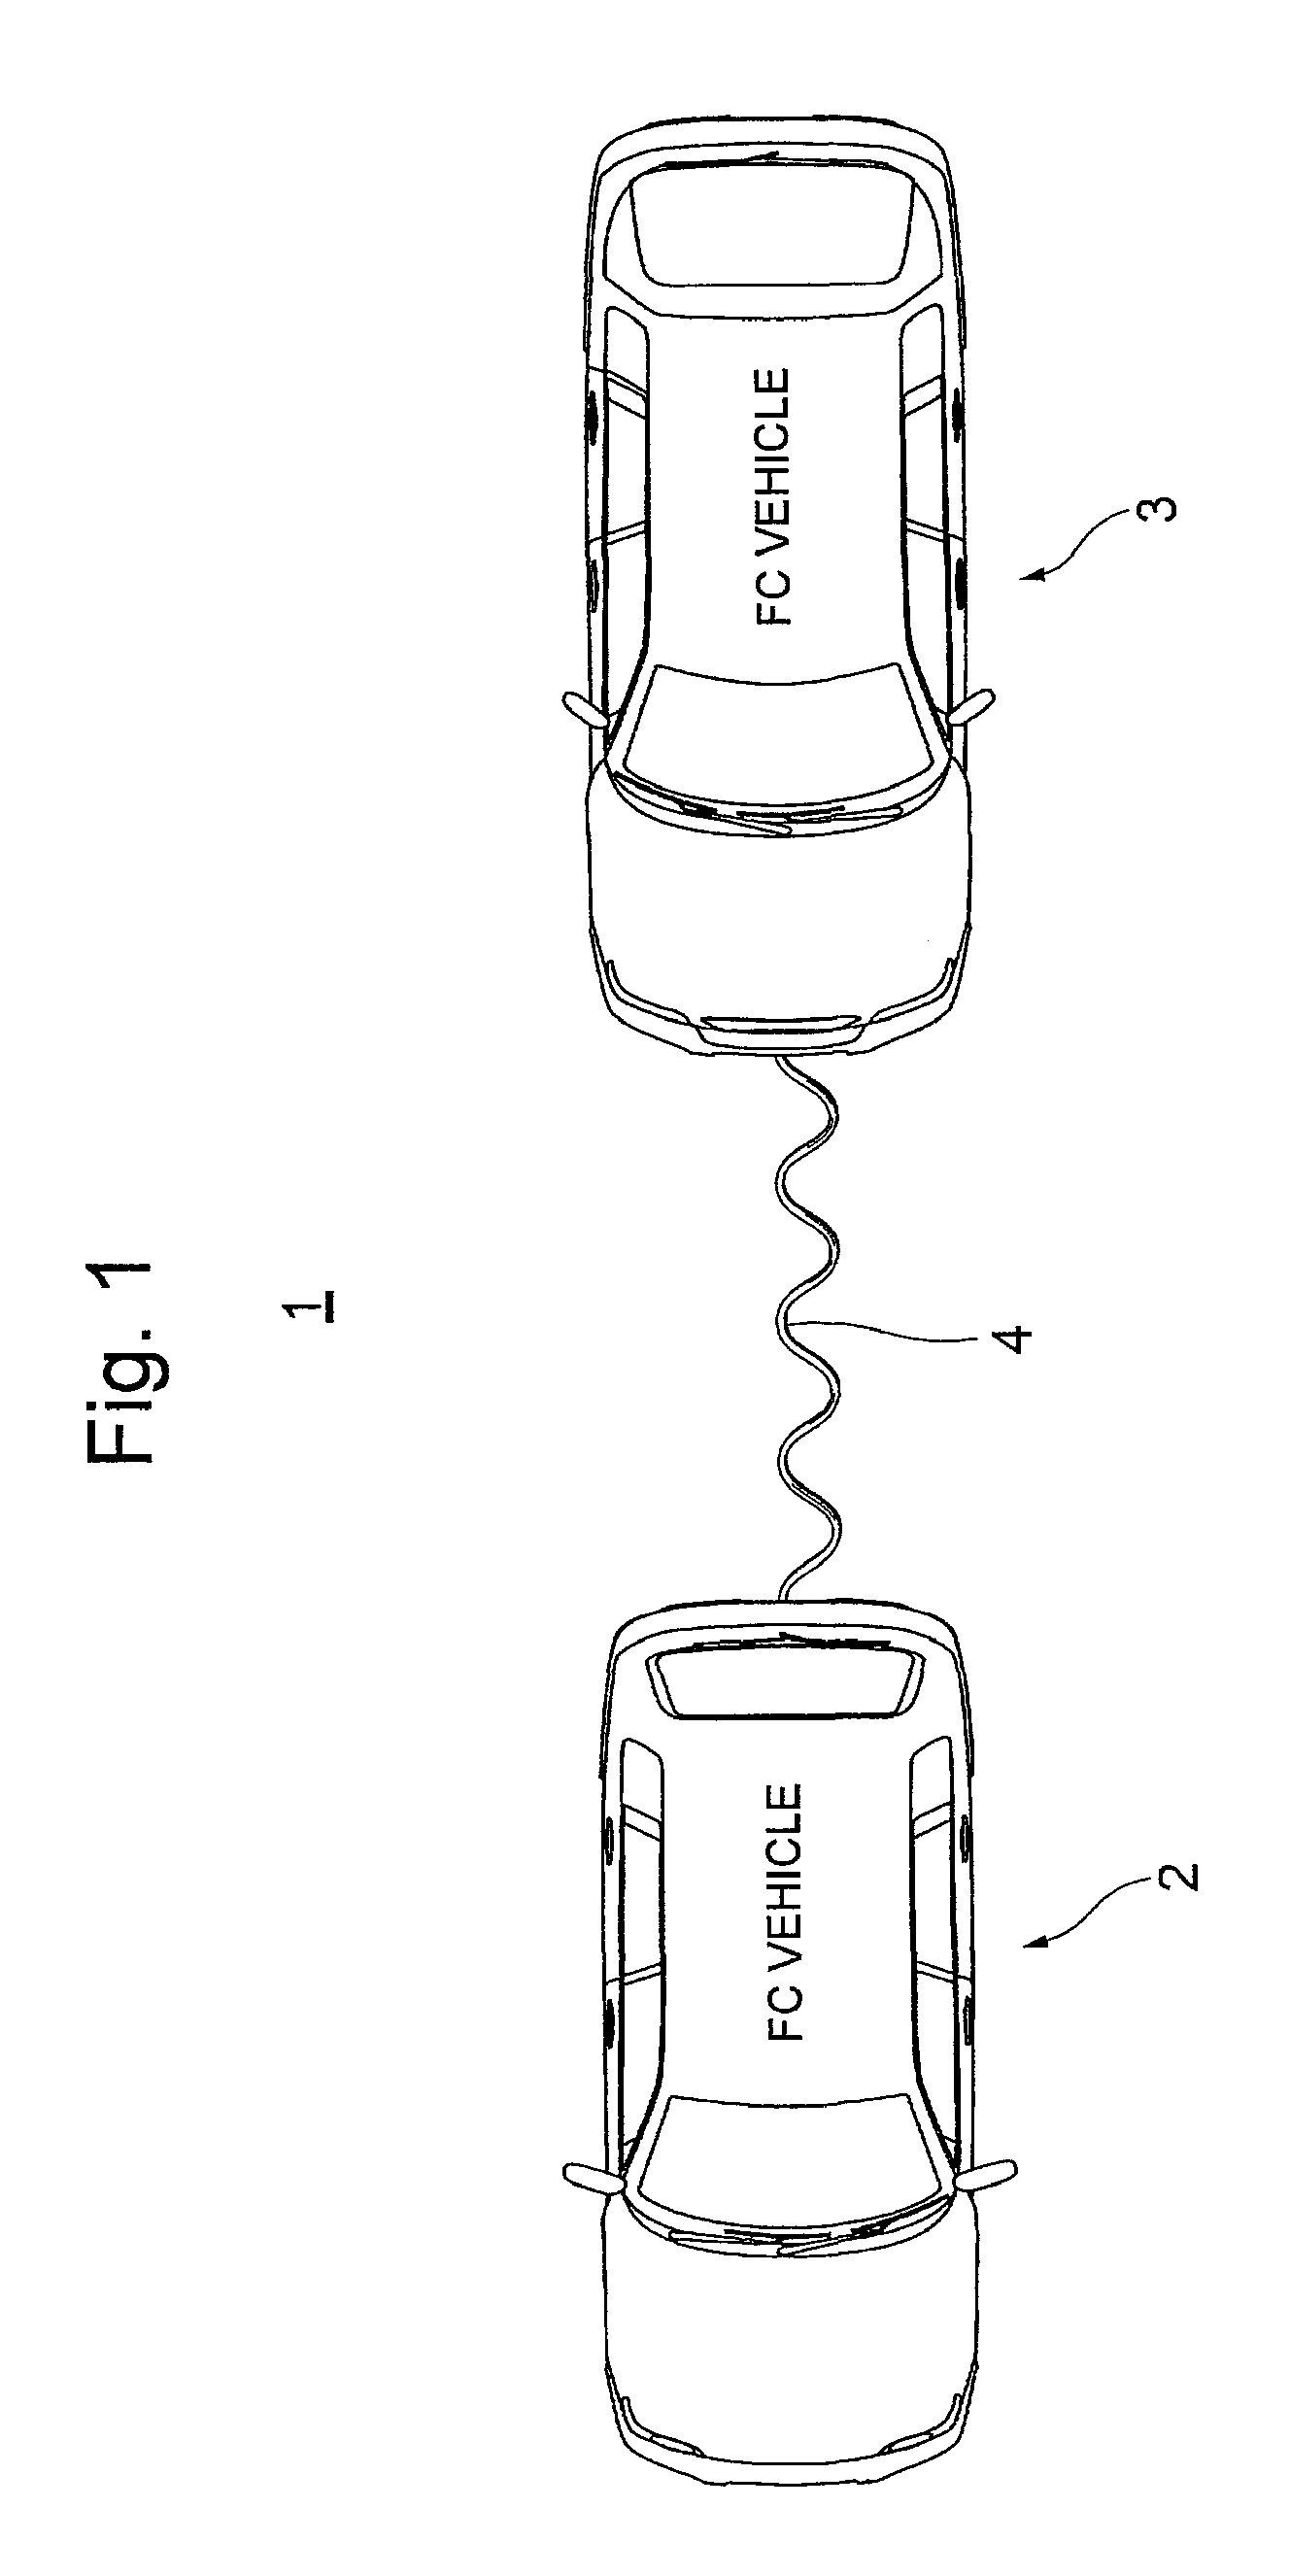 Vehicle assistance system